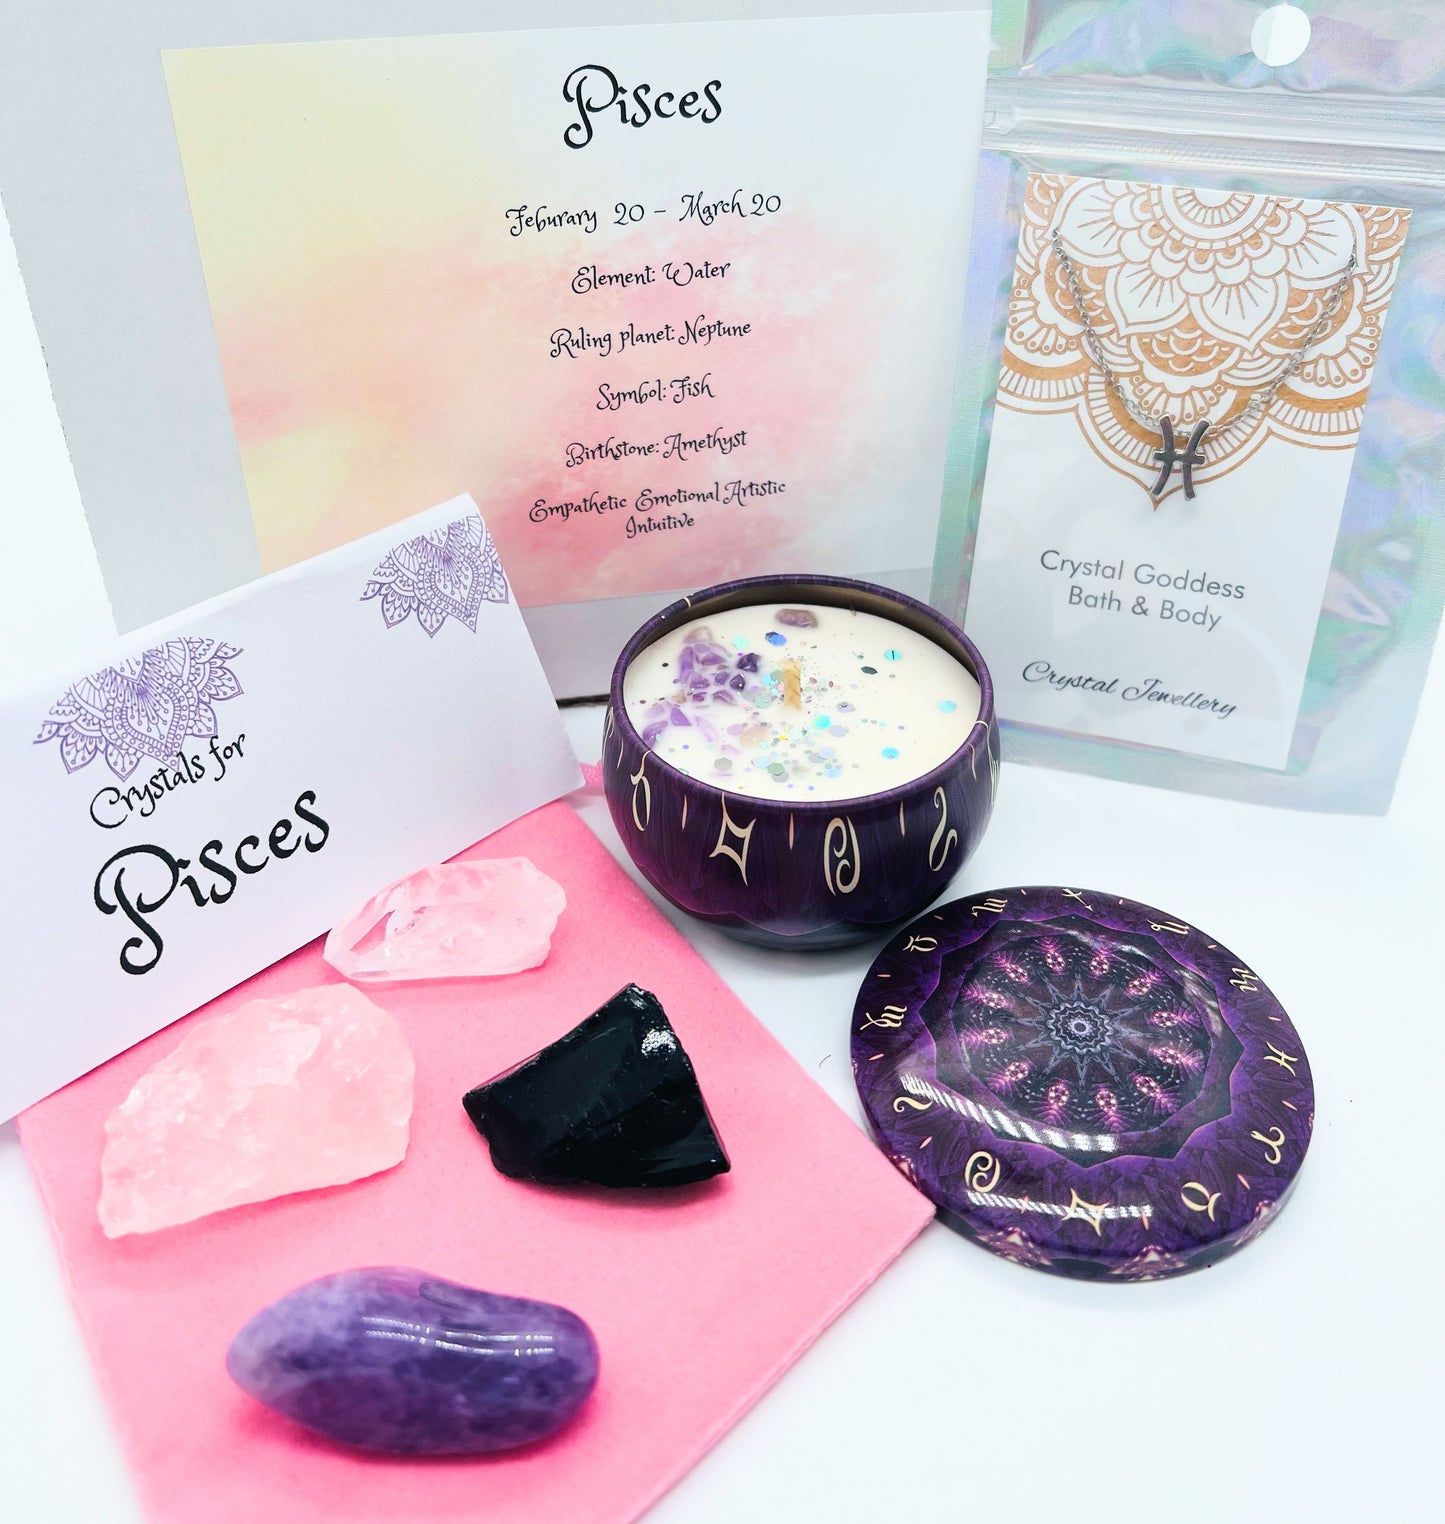 Pisces Zodiac gift box showing crystals for this sign and pendant necklace and crystal set.